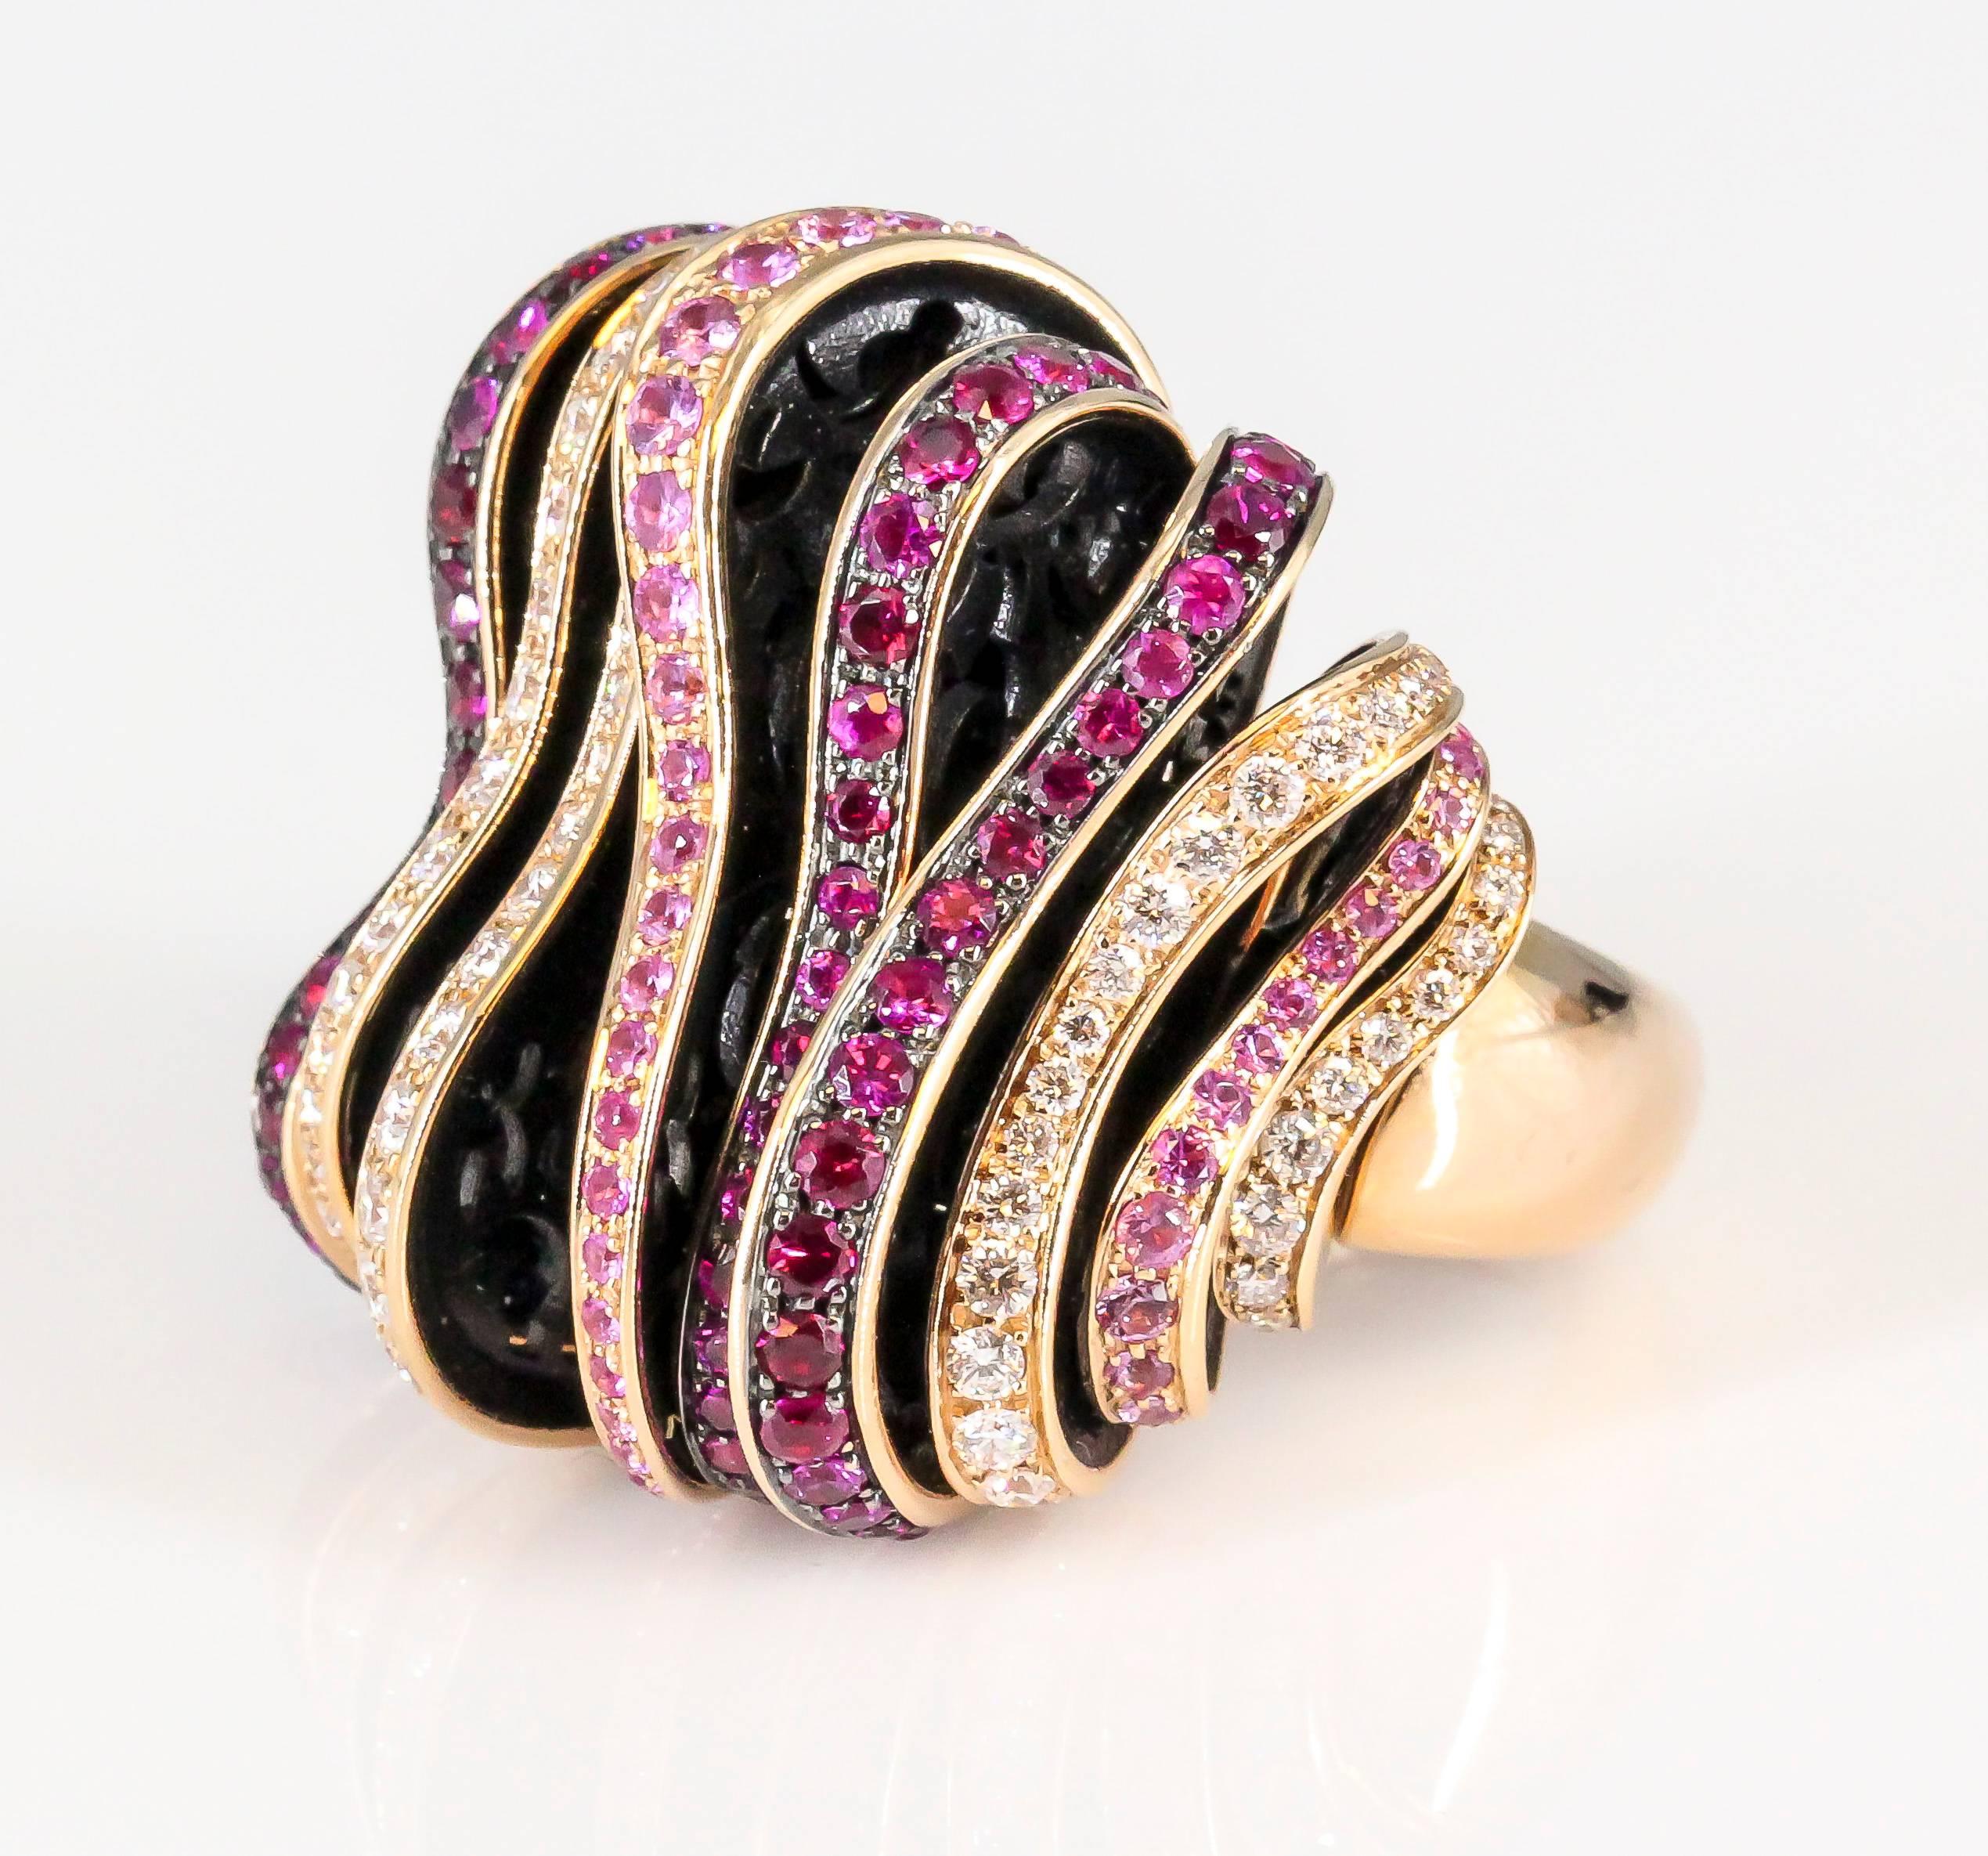 Whimsical pink sapphire, red ruby, diamond and 18K rose gold fashion ring by De Grisogono. It features high grade pink sapphires, rubies and round brilliant cut diamonds throughout, set on gold and black resin piece puzzle sections. Current size 53.